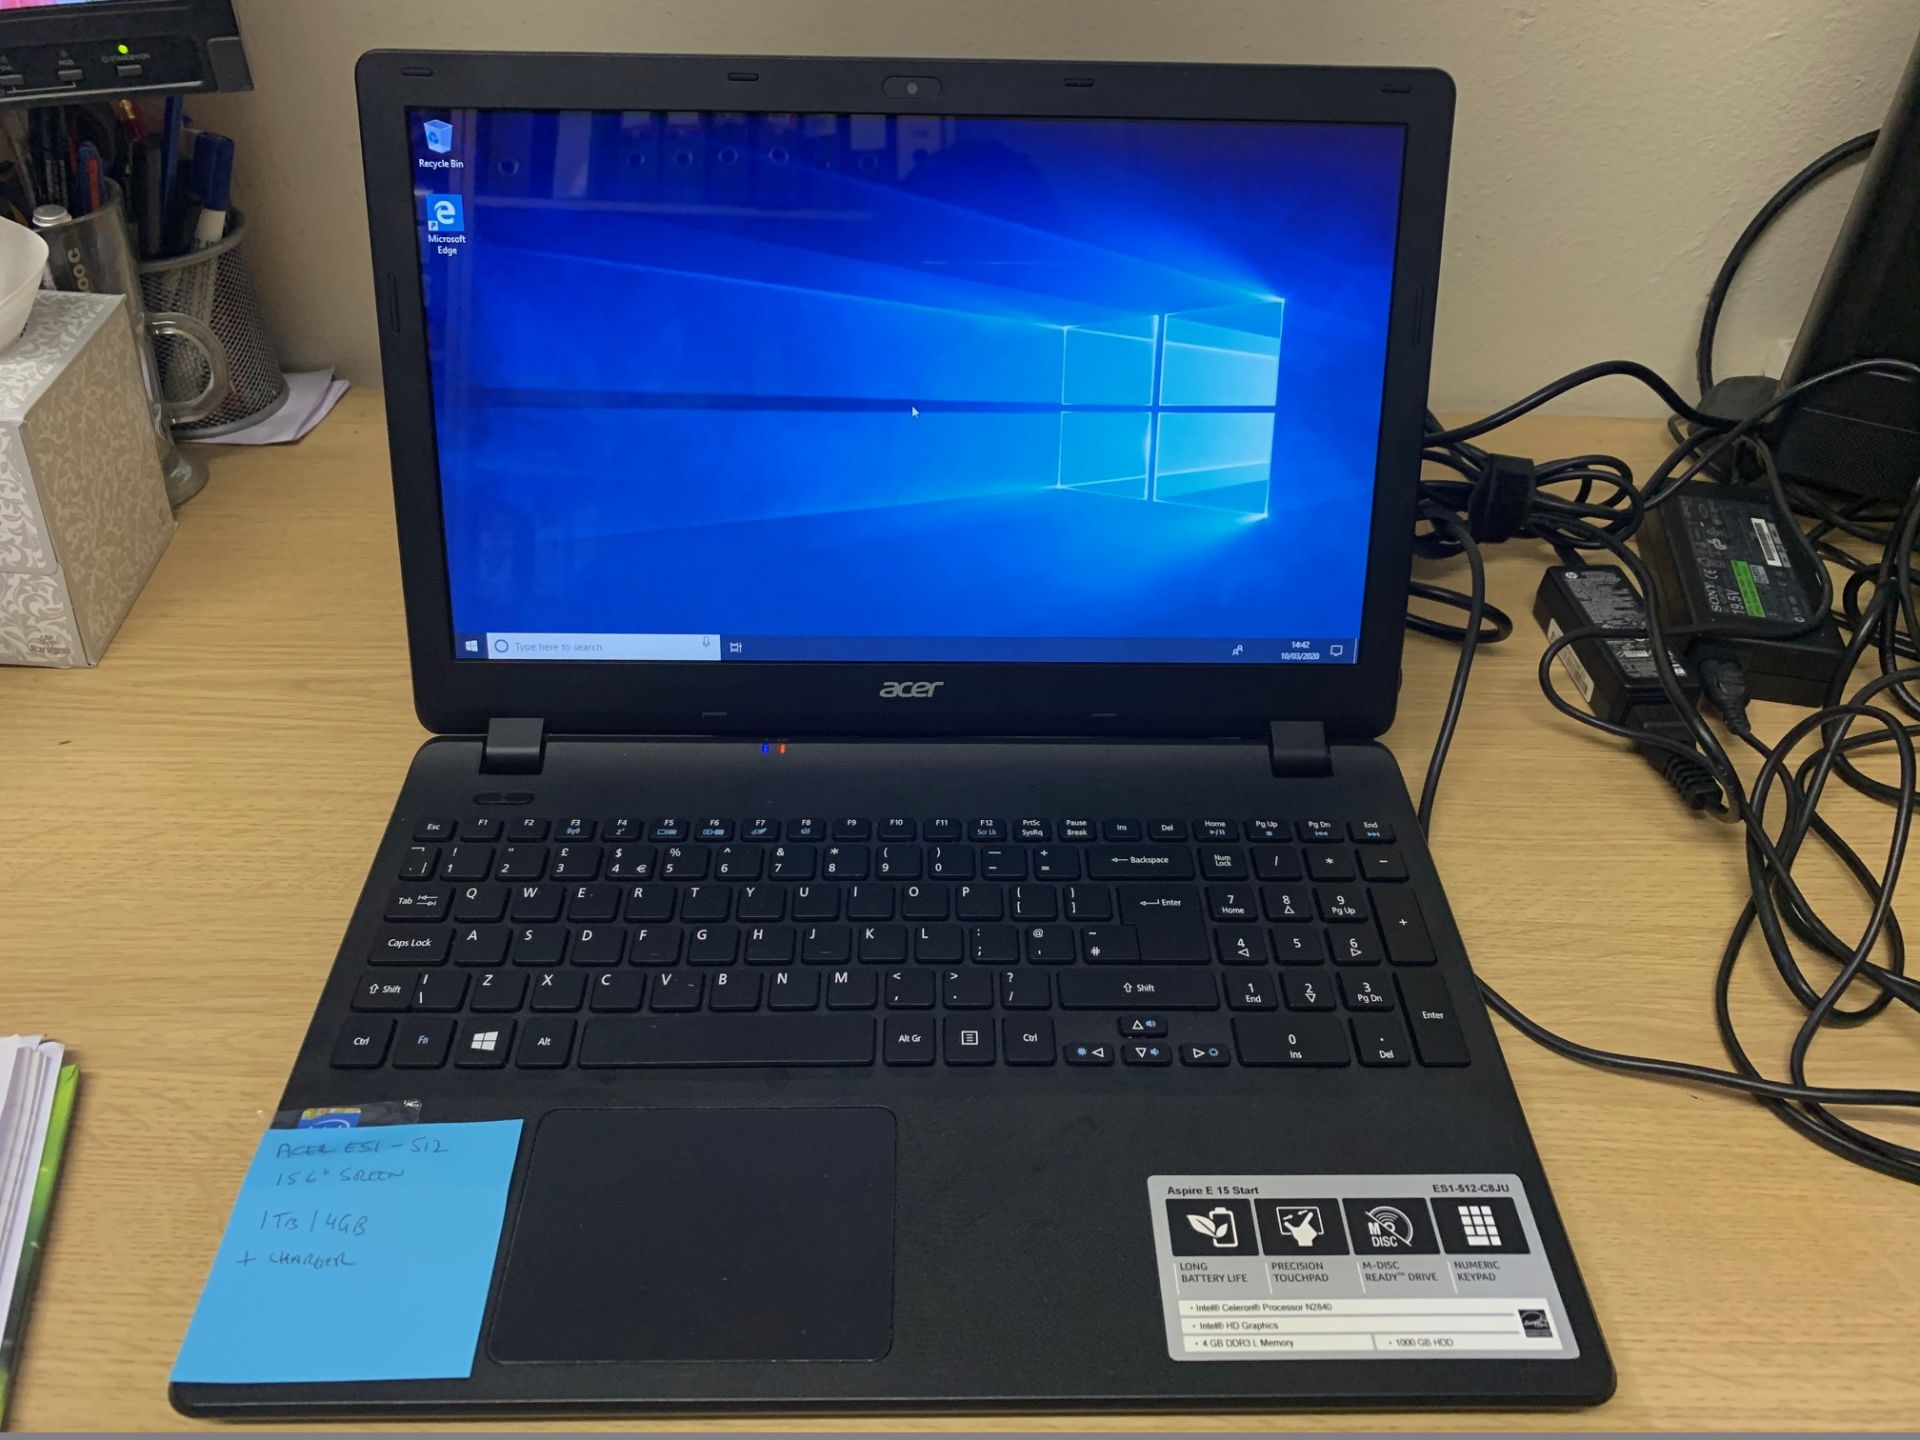 Acer E51-512 Laptop - 1TB Hard Drive, 4GB RAM, 15.6" Screen, Loaded With Windows 10 & Complete